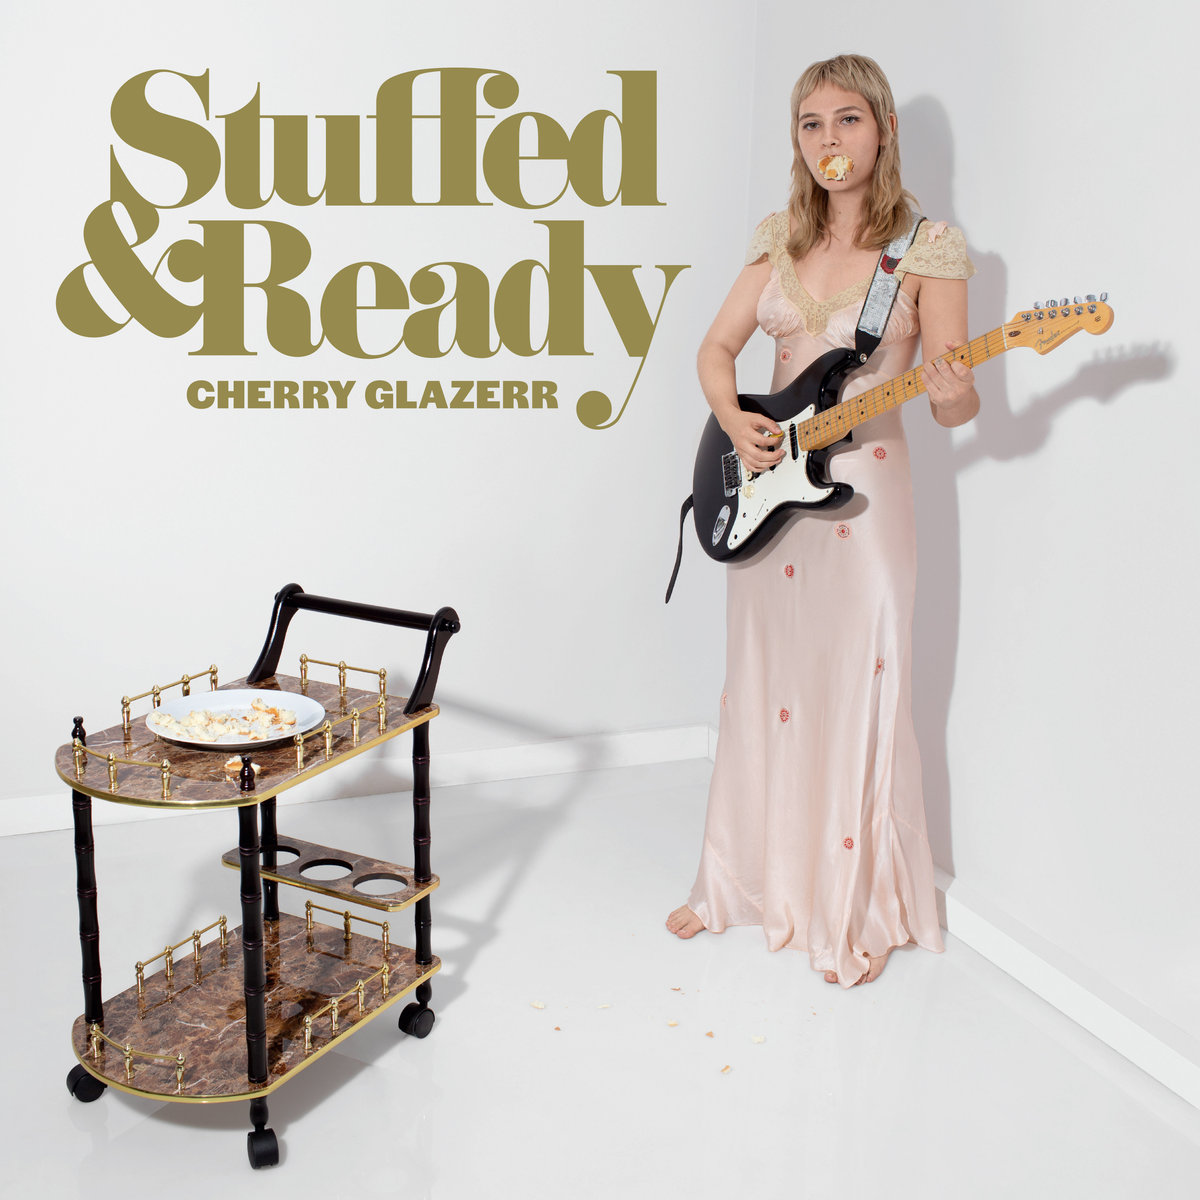 'Stuffed & Ready' by Cherry Glazerr, album review by Northern Transmissions